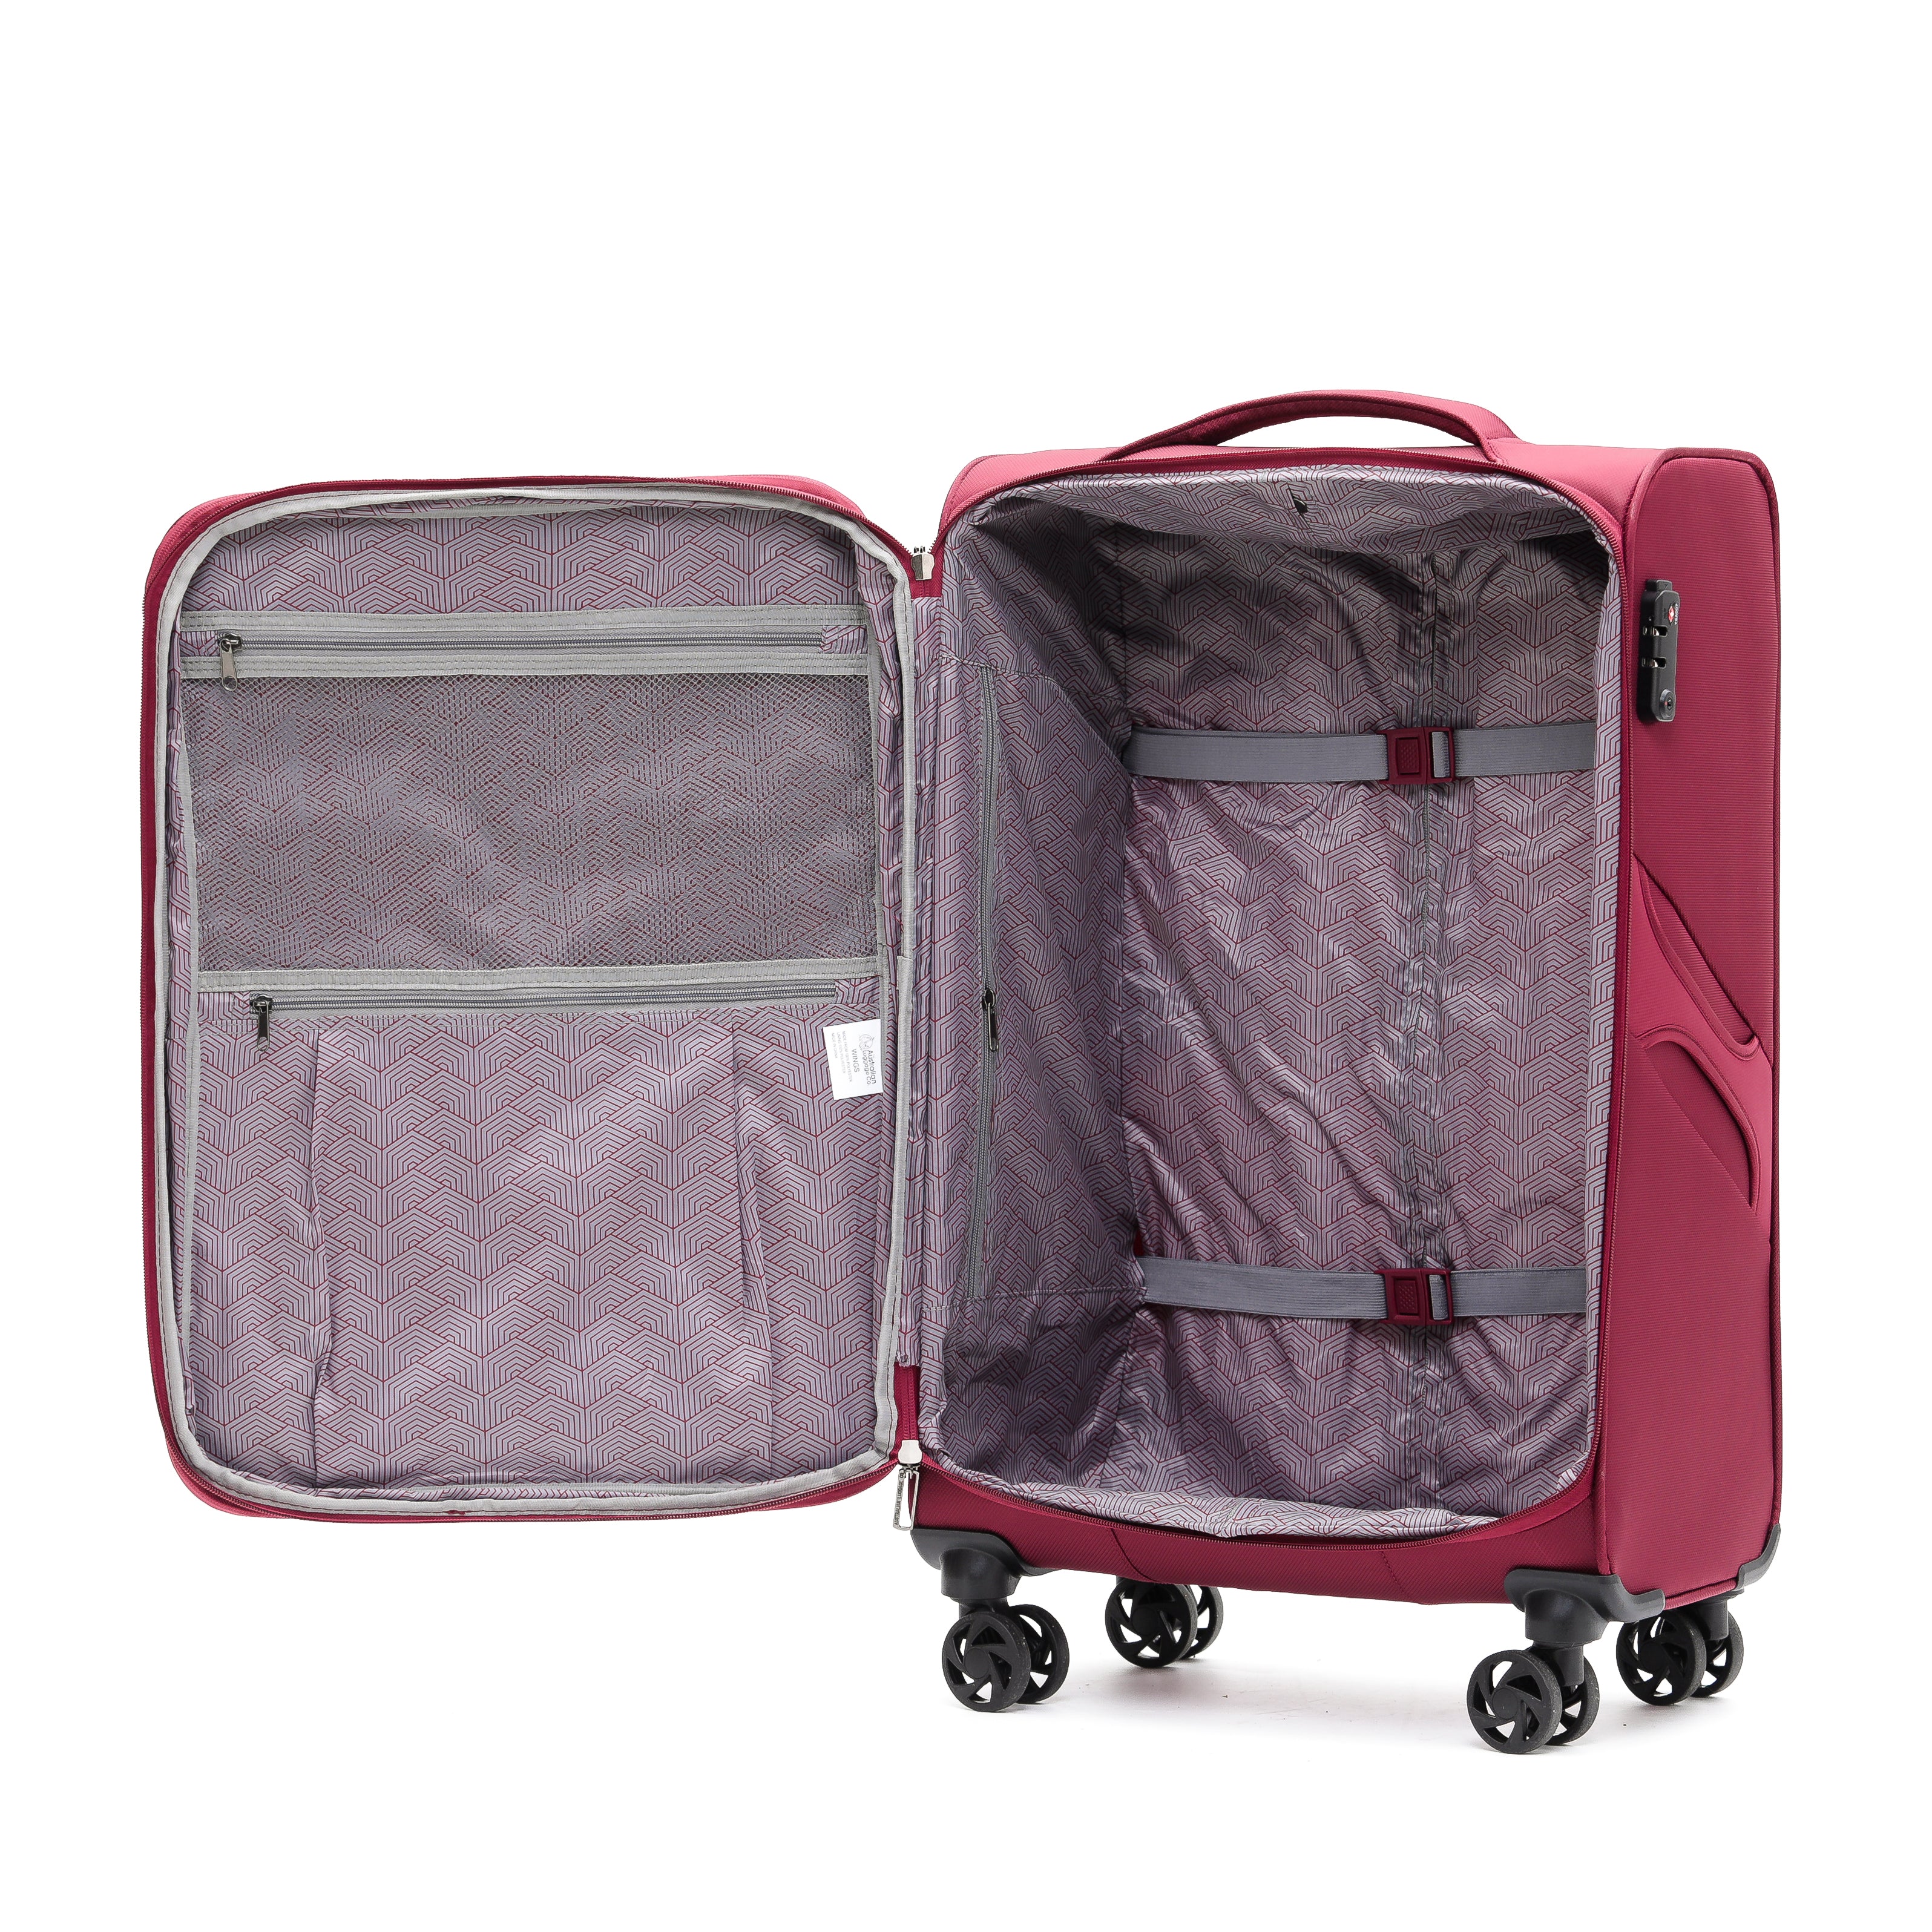 Aus Luggage - WINGS Set of 3 Suitcases - Wine-5